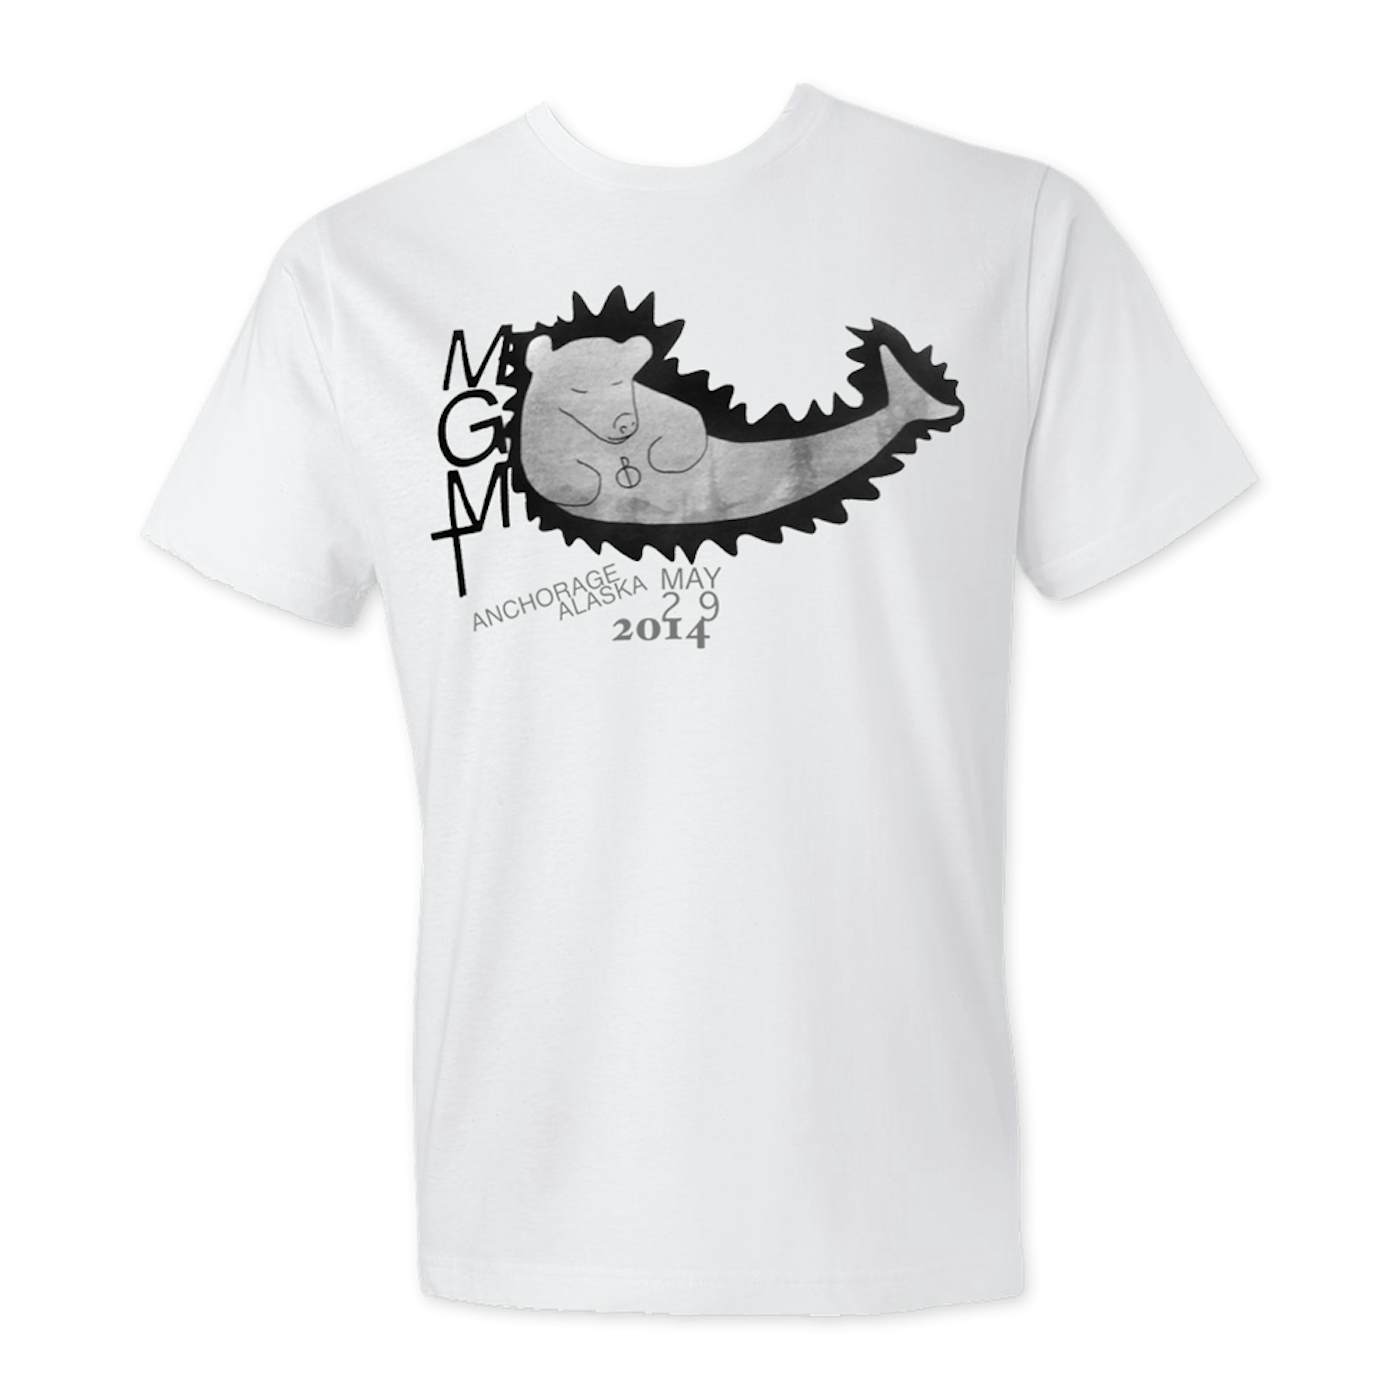 MGMT Anchorage '14 T-shirt